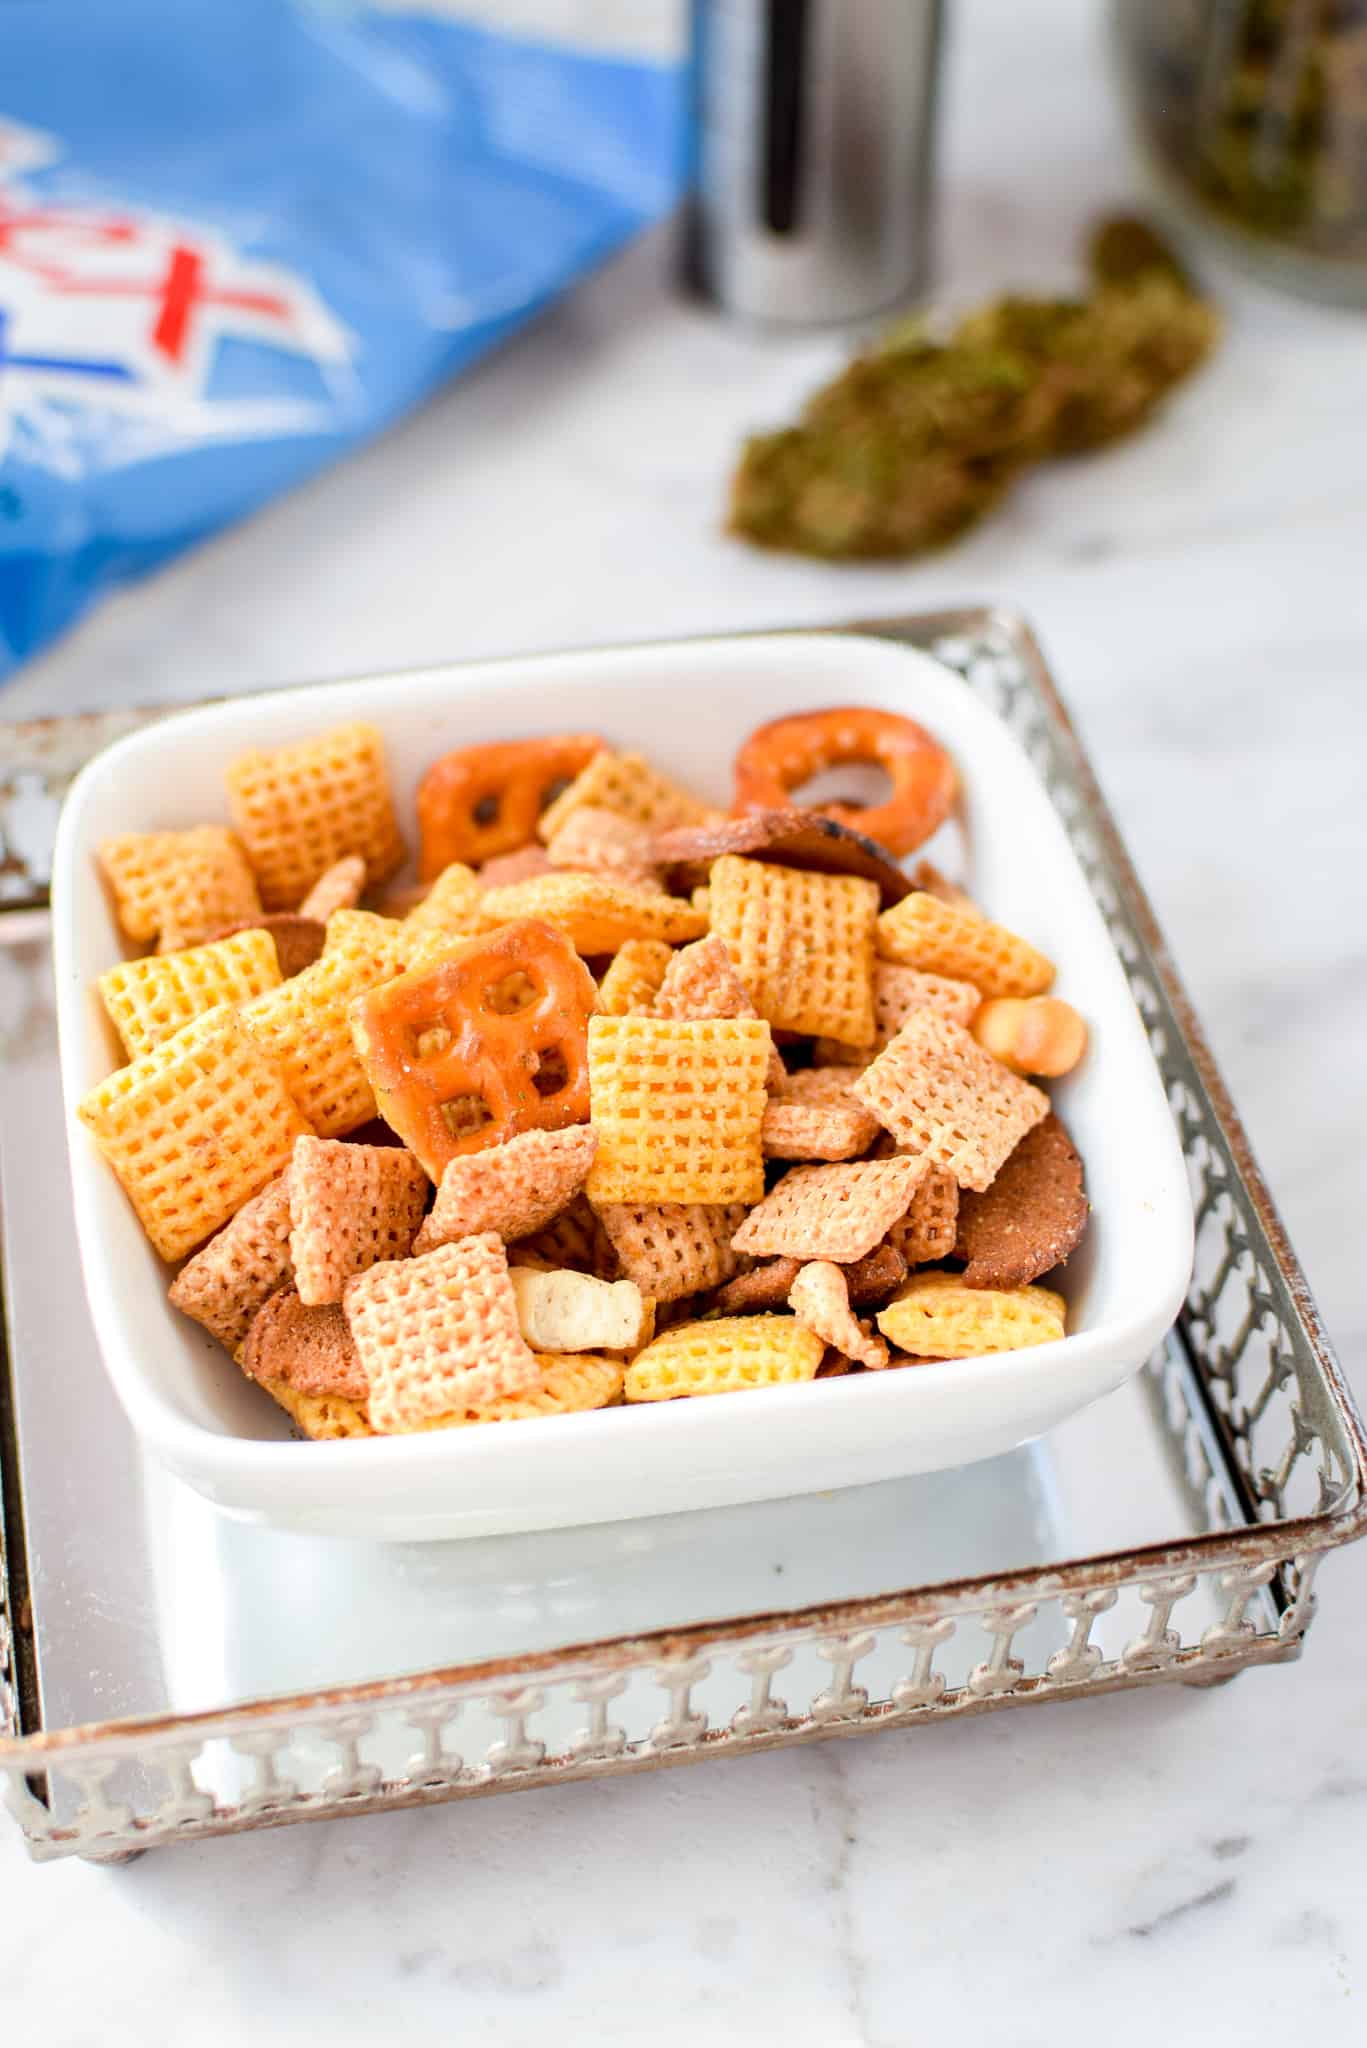 A picture of a while bowl containing cannabis chex mix.